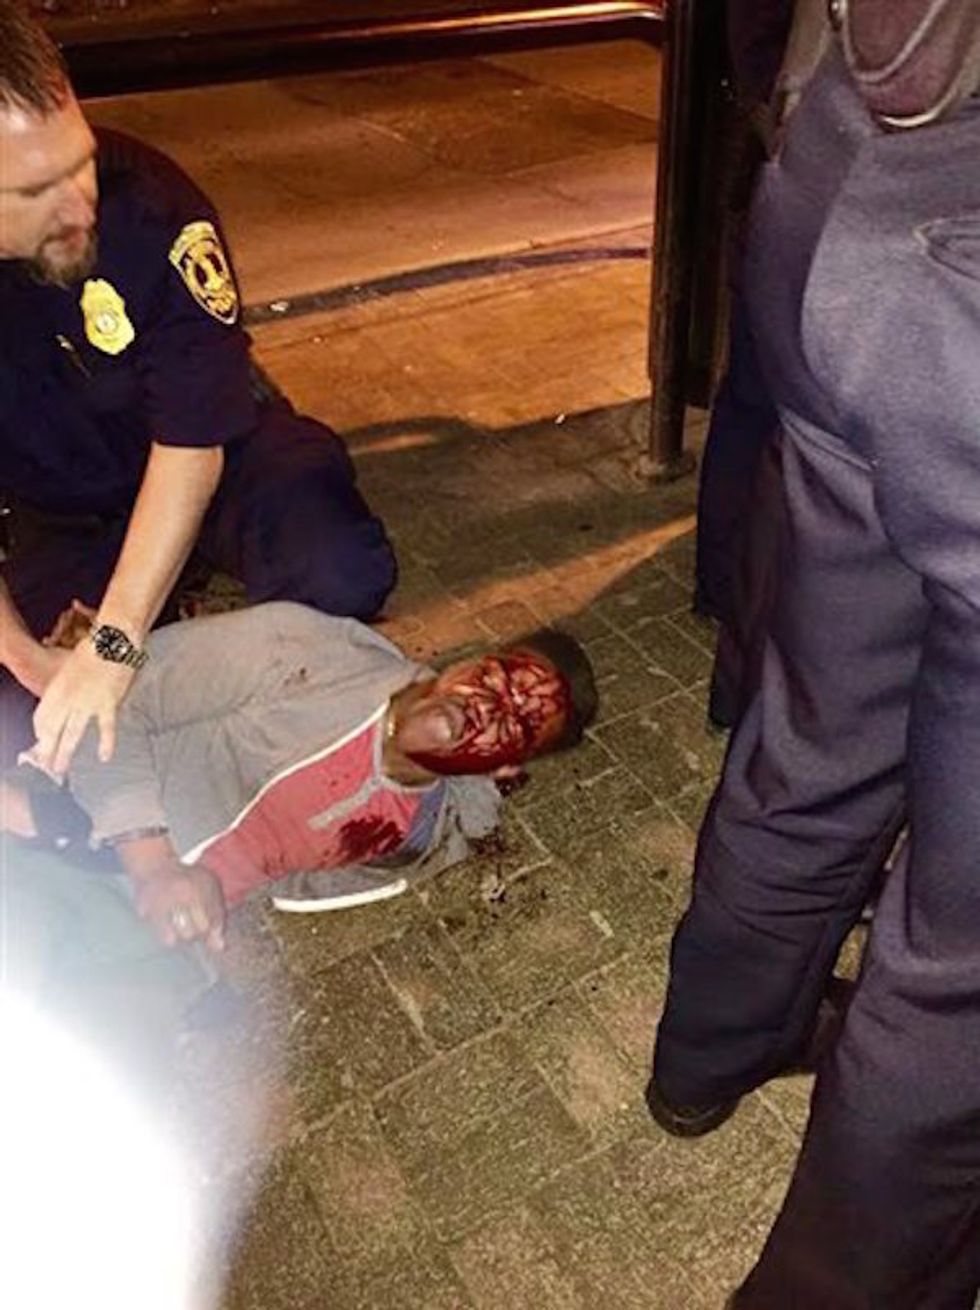 Virginia Governor Calls for Investigation Into Arrest of Student Seen Bloodied in Viral Photo